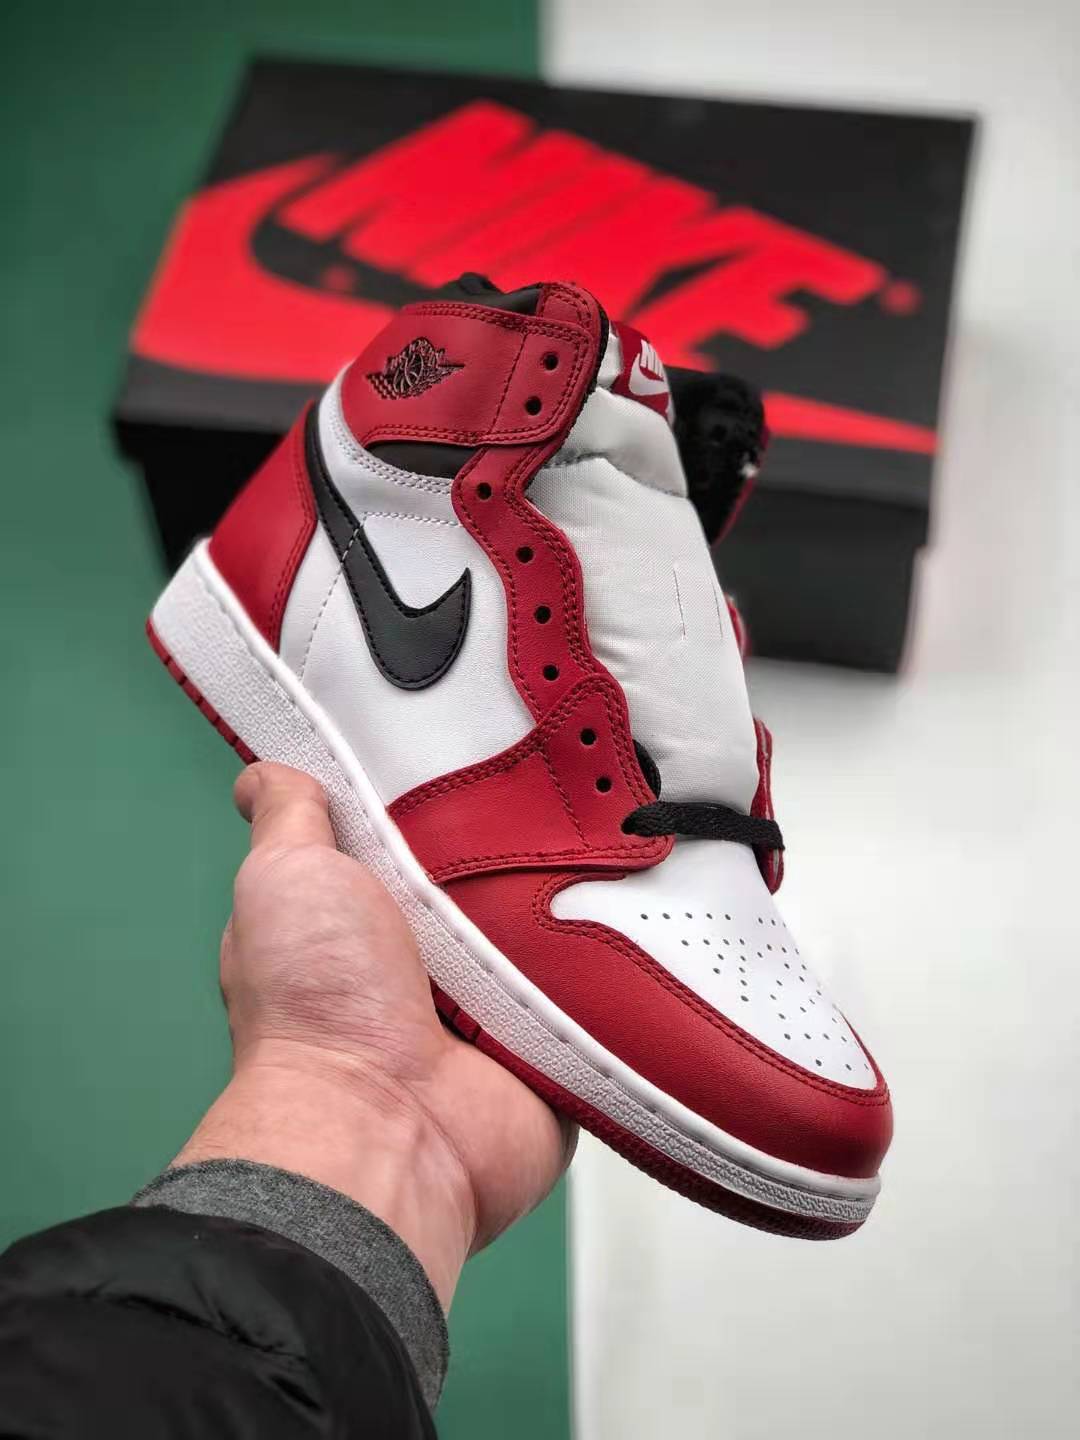 Air Jordan 1 Retro High OG Chicago 2015 - Limited Edition Sneakers